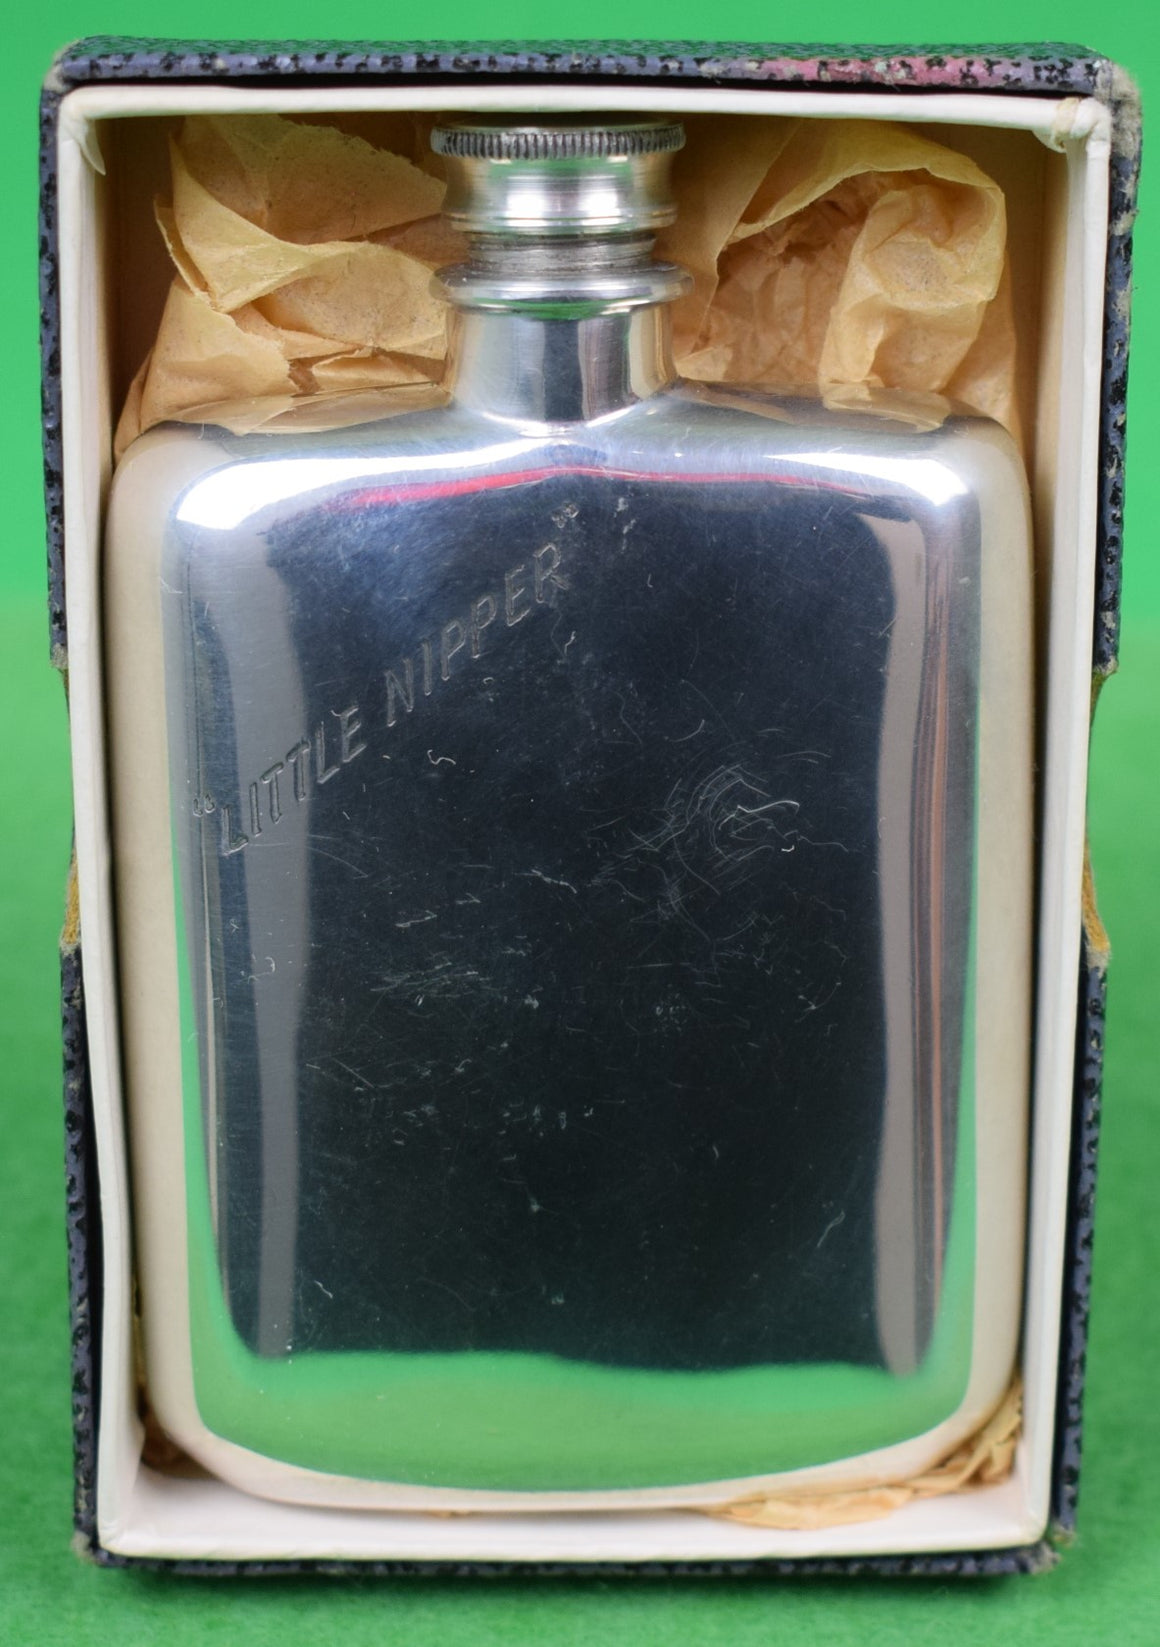 "Abercrombie & Fitch "Little Nipper" 2oz Flask Made In England" (In A&F Box)